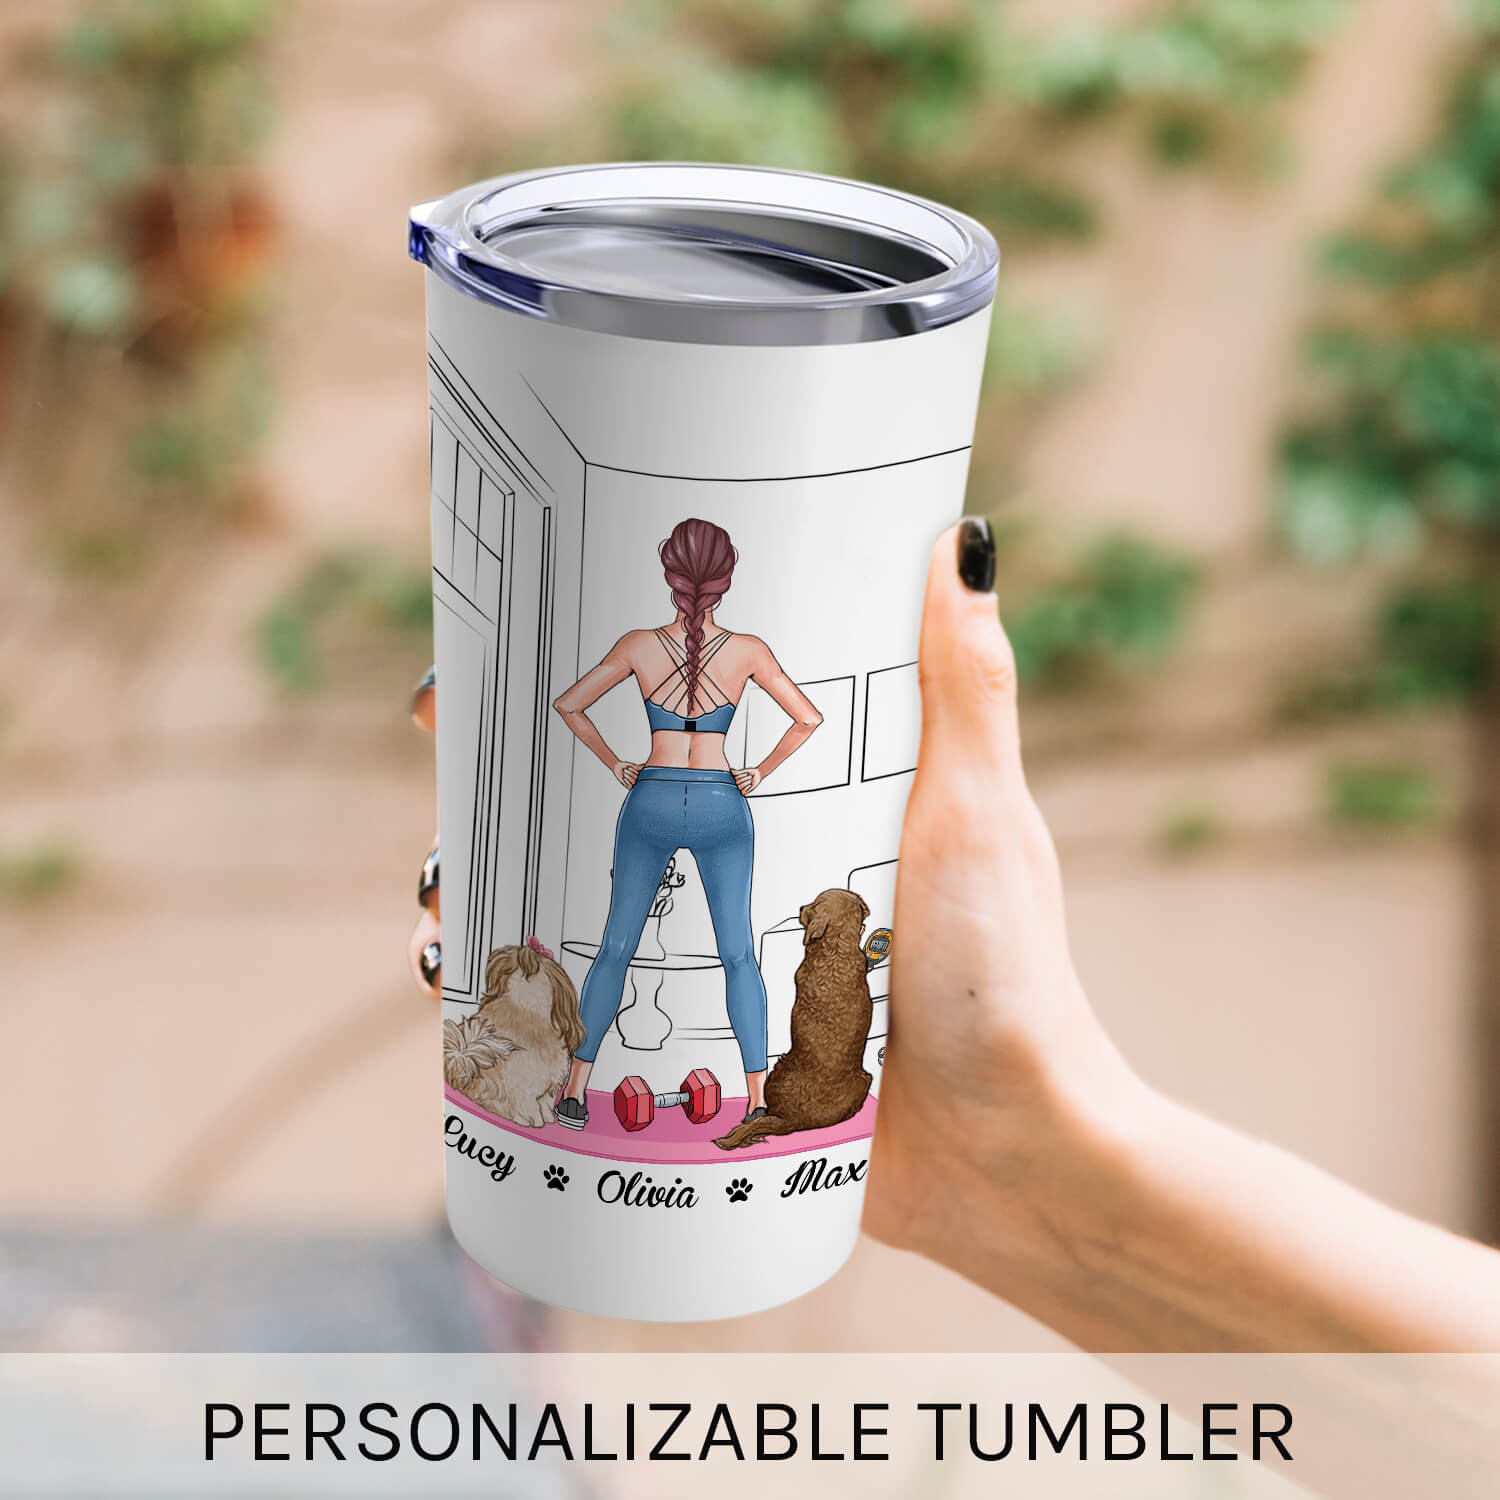 Lift Weight And Hang Out With My Dogs - Personalized Birthday or Christmas gift for Dog Lovers, for Fitness Lovers - Custom Tumbler - MyMindfulGifts